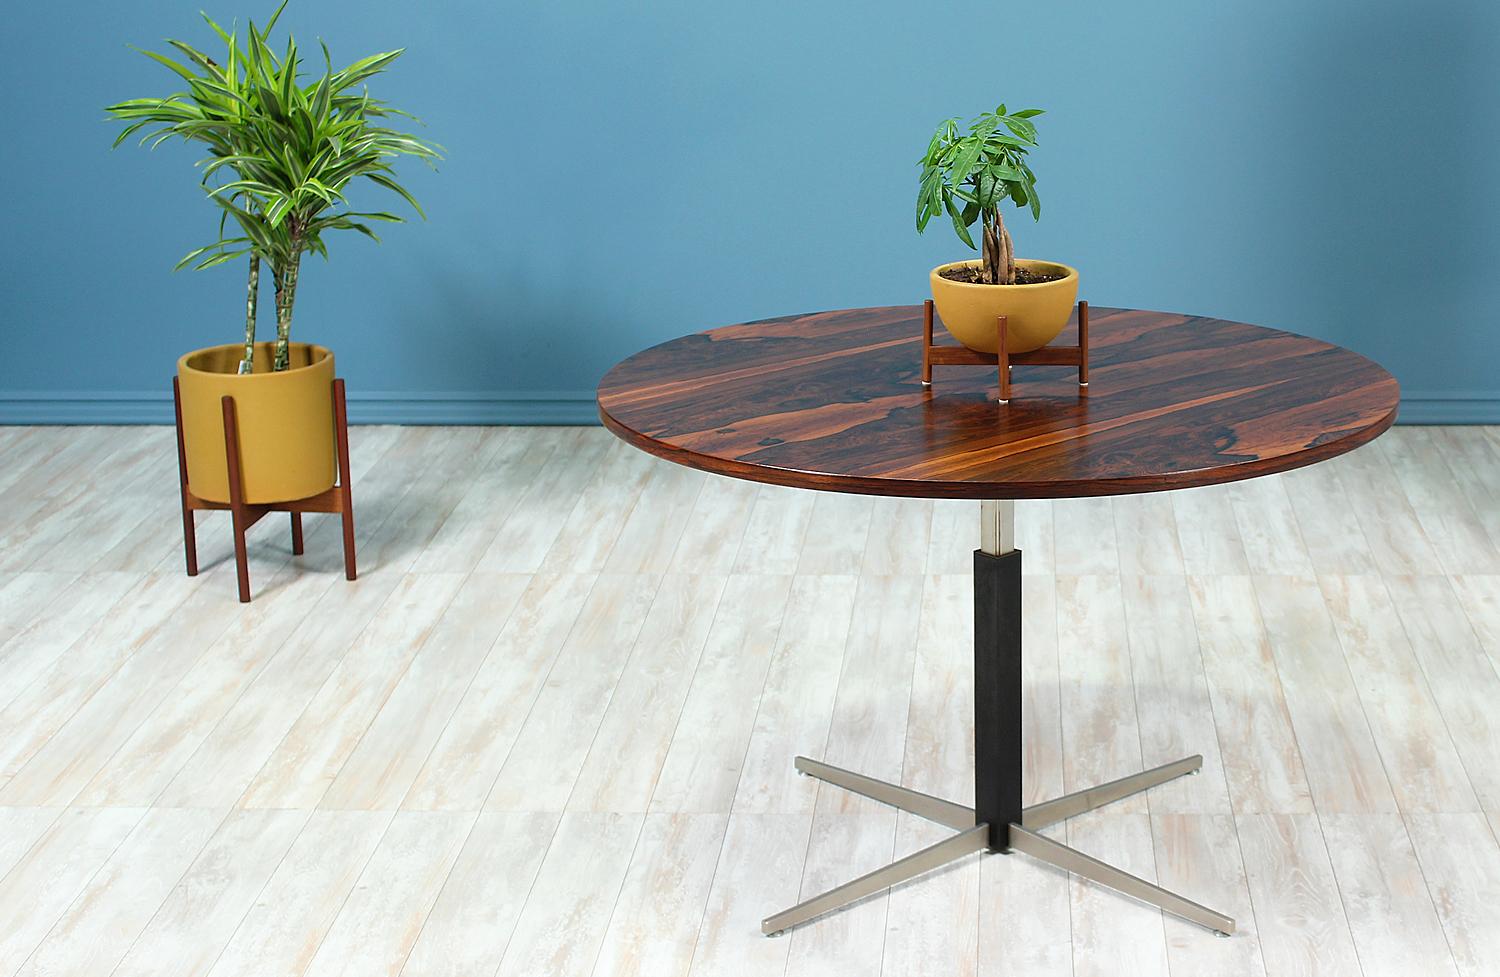 Adjustable table designed and manufactured in the United States circa 1960’s. This exclusive design features a magnificent rosewood top with an intricate grain pattern that shows symmetry and sits on a steel base. This height adjustable table